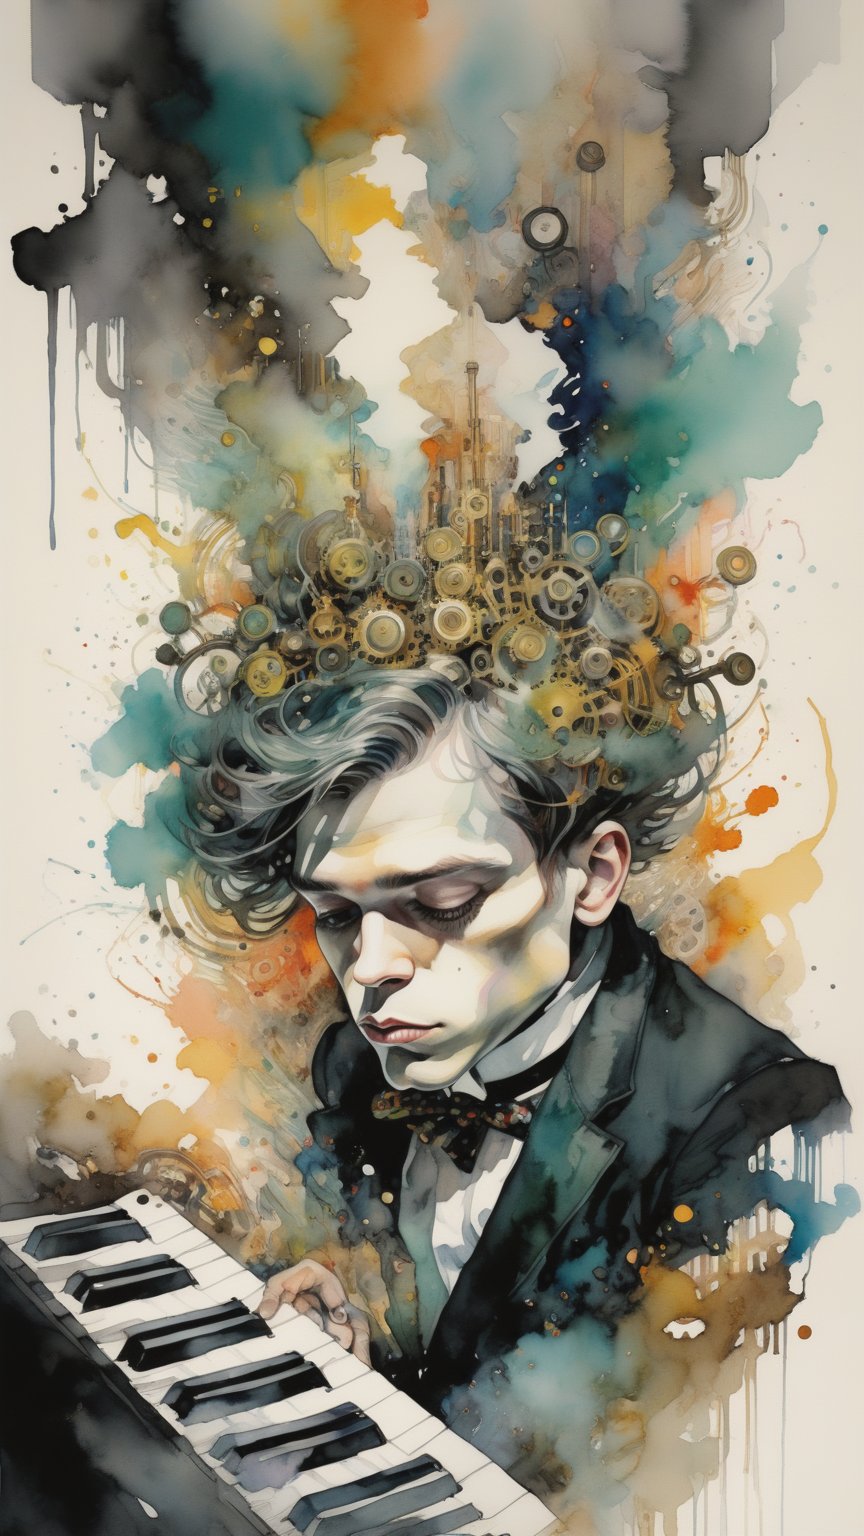 Glenn Gould playing a keyboard,  surrounded by steampunk gear,  tubes and colored liquids. Art by Agnes Cecile,  art by J.C. Leyendecker.